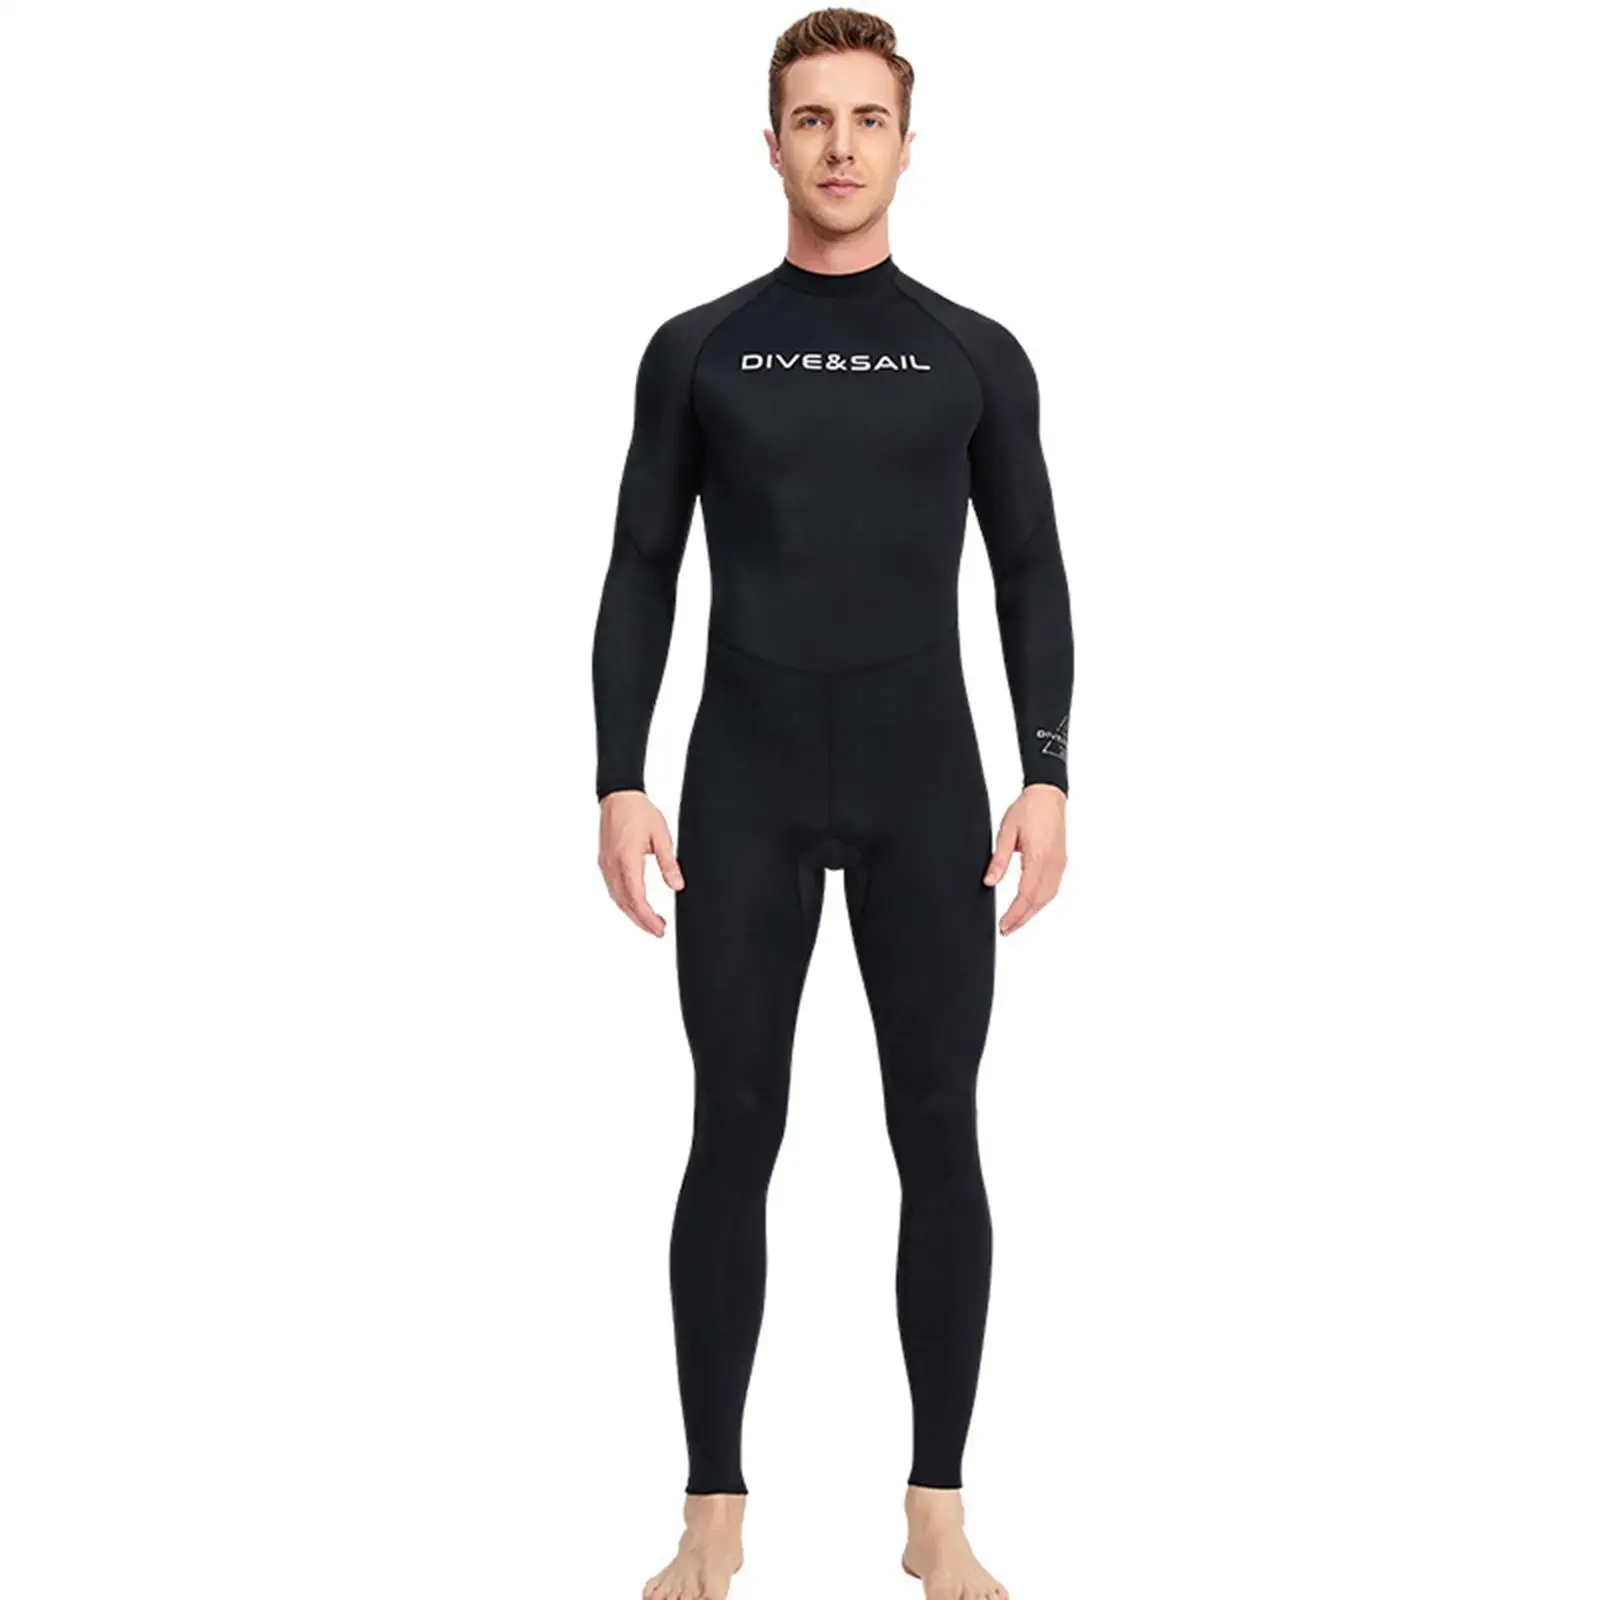 Diving Wetsuit Scuba Snorkeling Full Body UV Protection Kayaking for Water